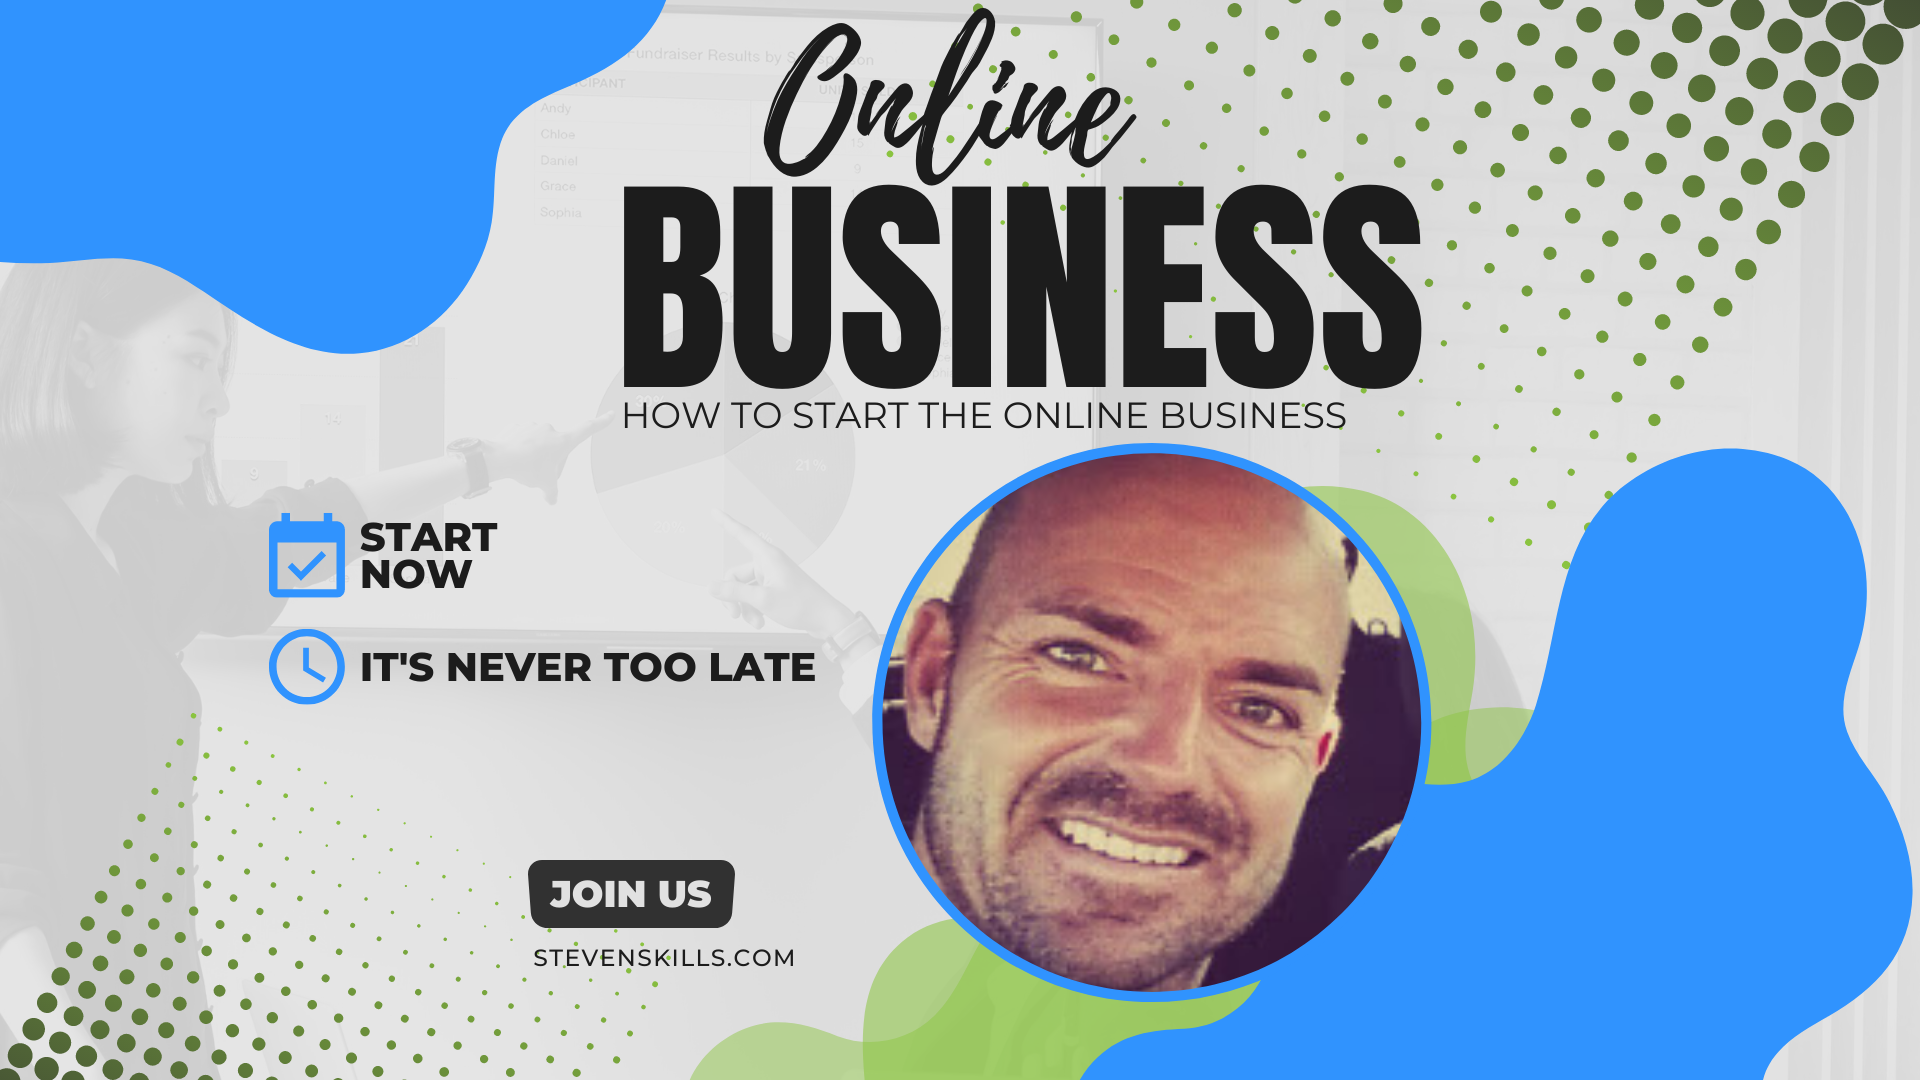 How to Start the Online Business You’ve Always Wanted